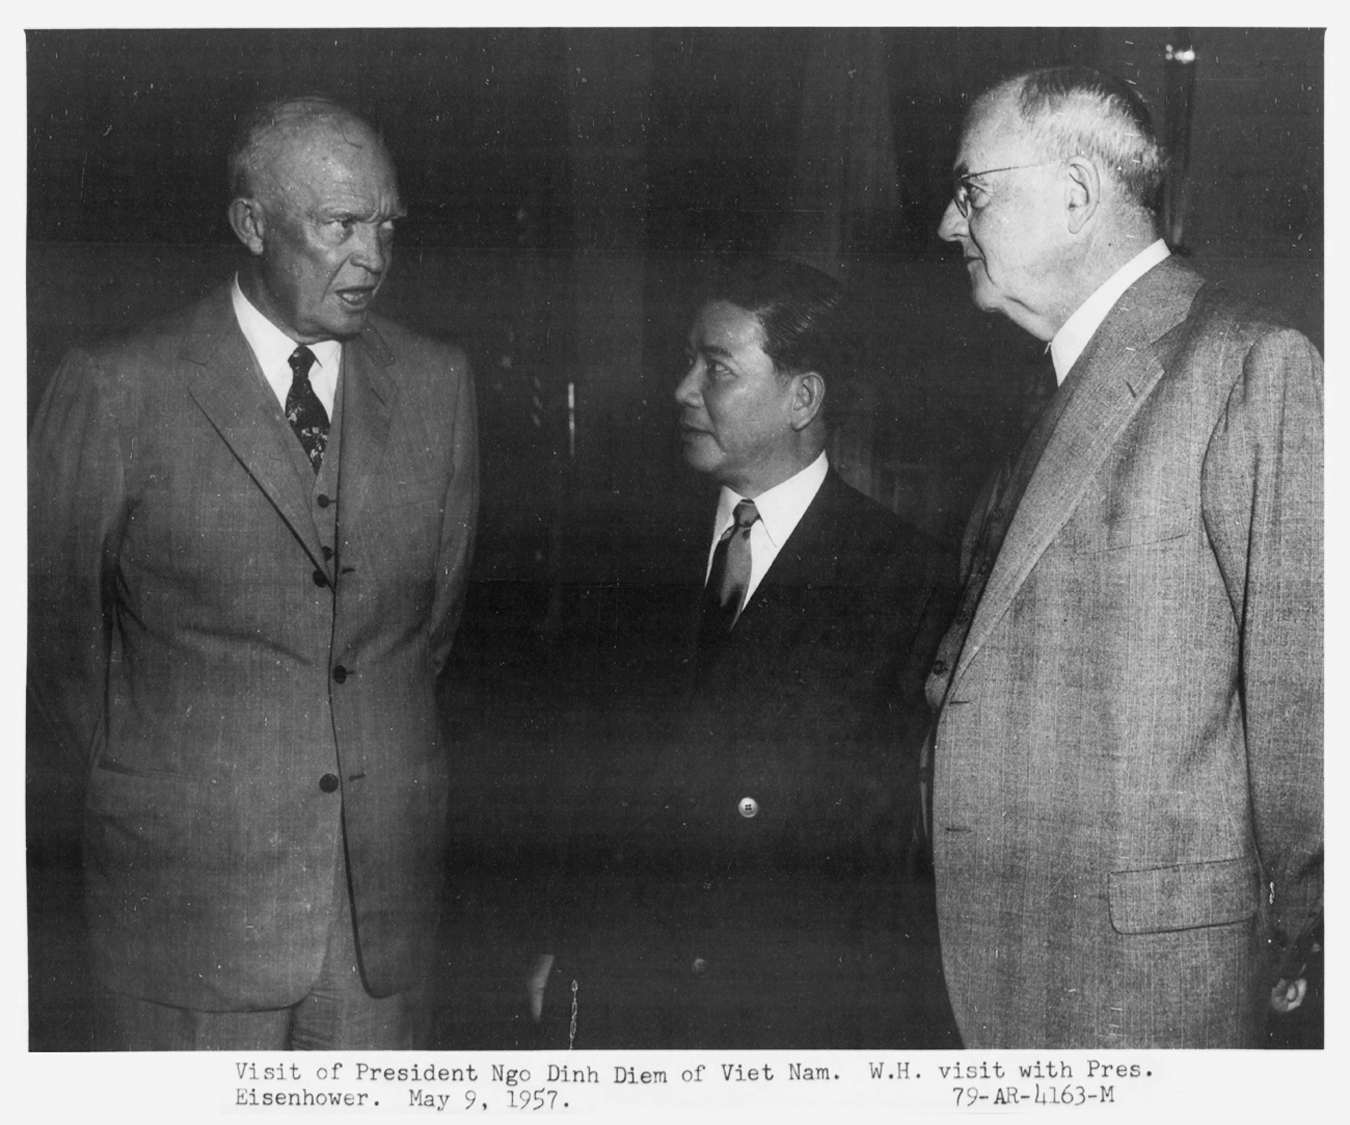 an old black and white po of two men looking at another man